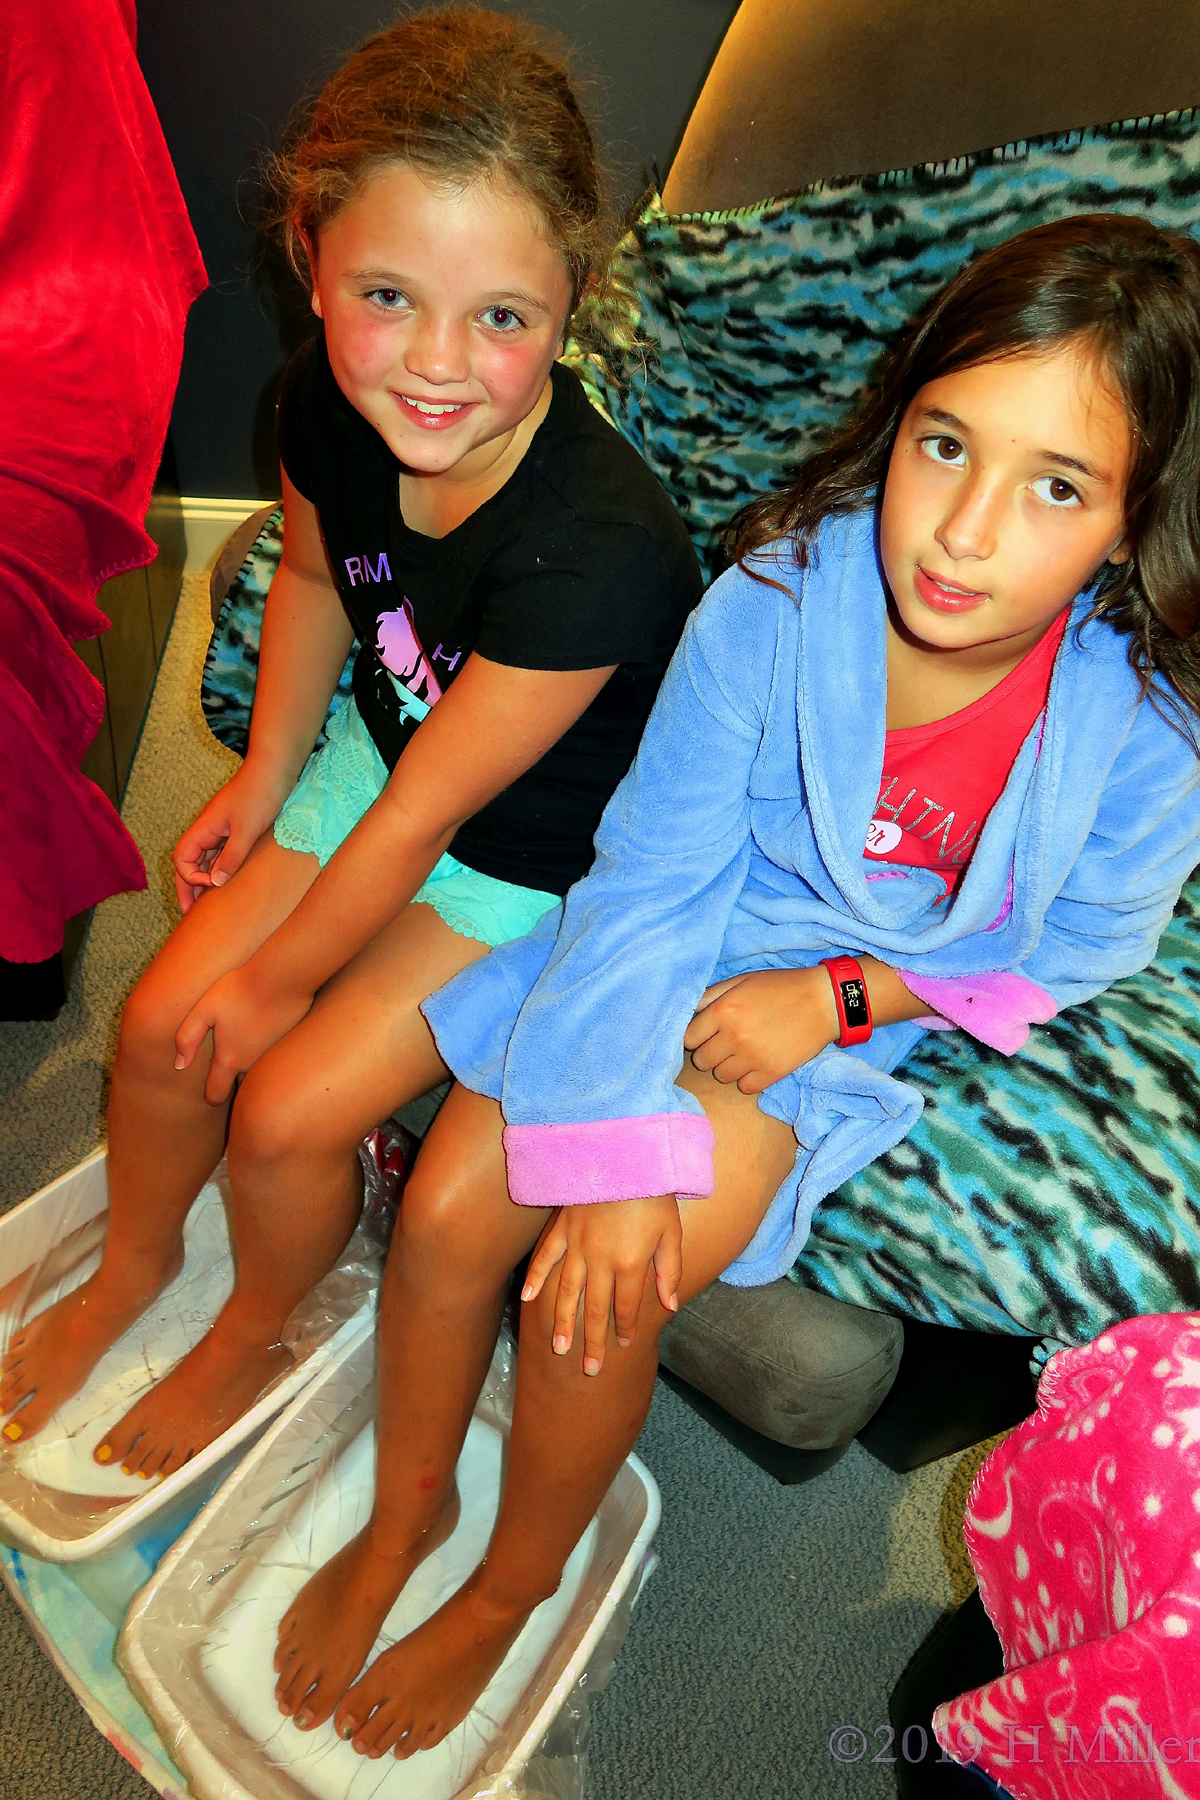 Practiced Poses! Kids Pedis At The Kids Spa Party! 